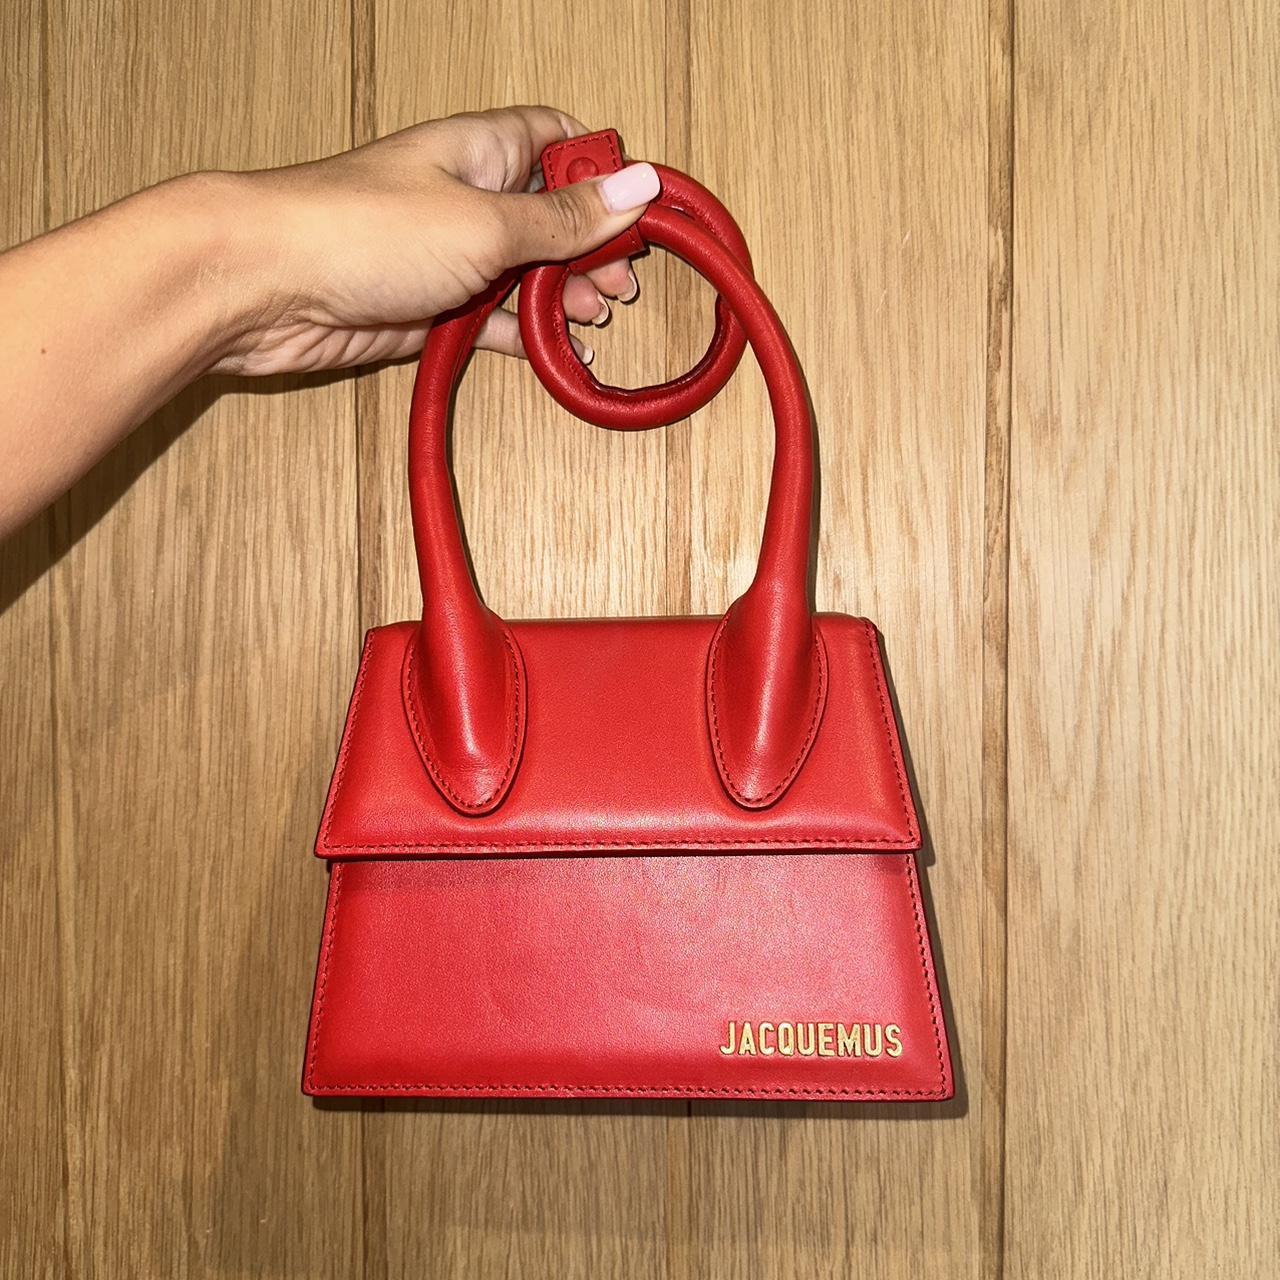 Jacquemus bag in red. Only worn a few times. Has a... - Depop